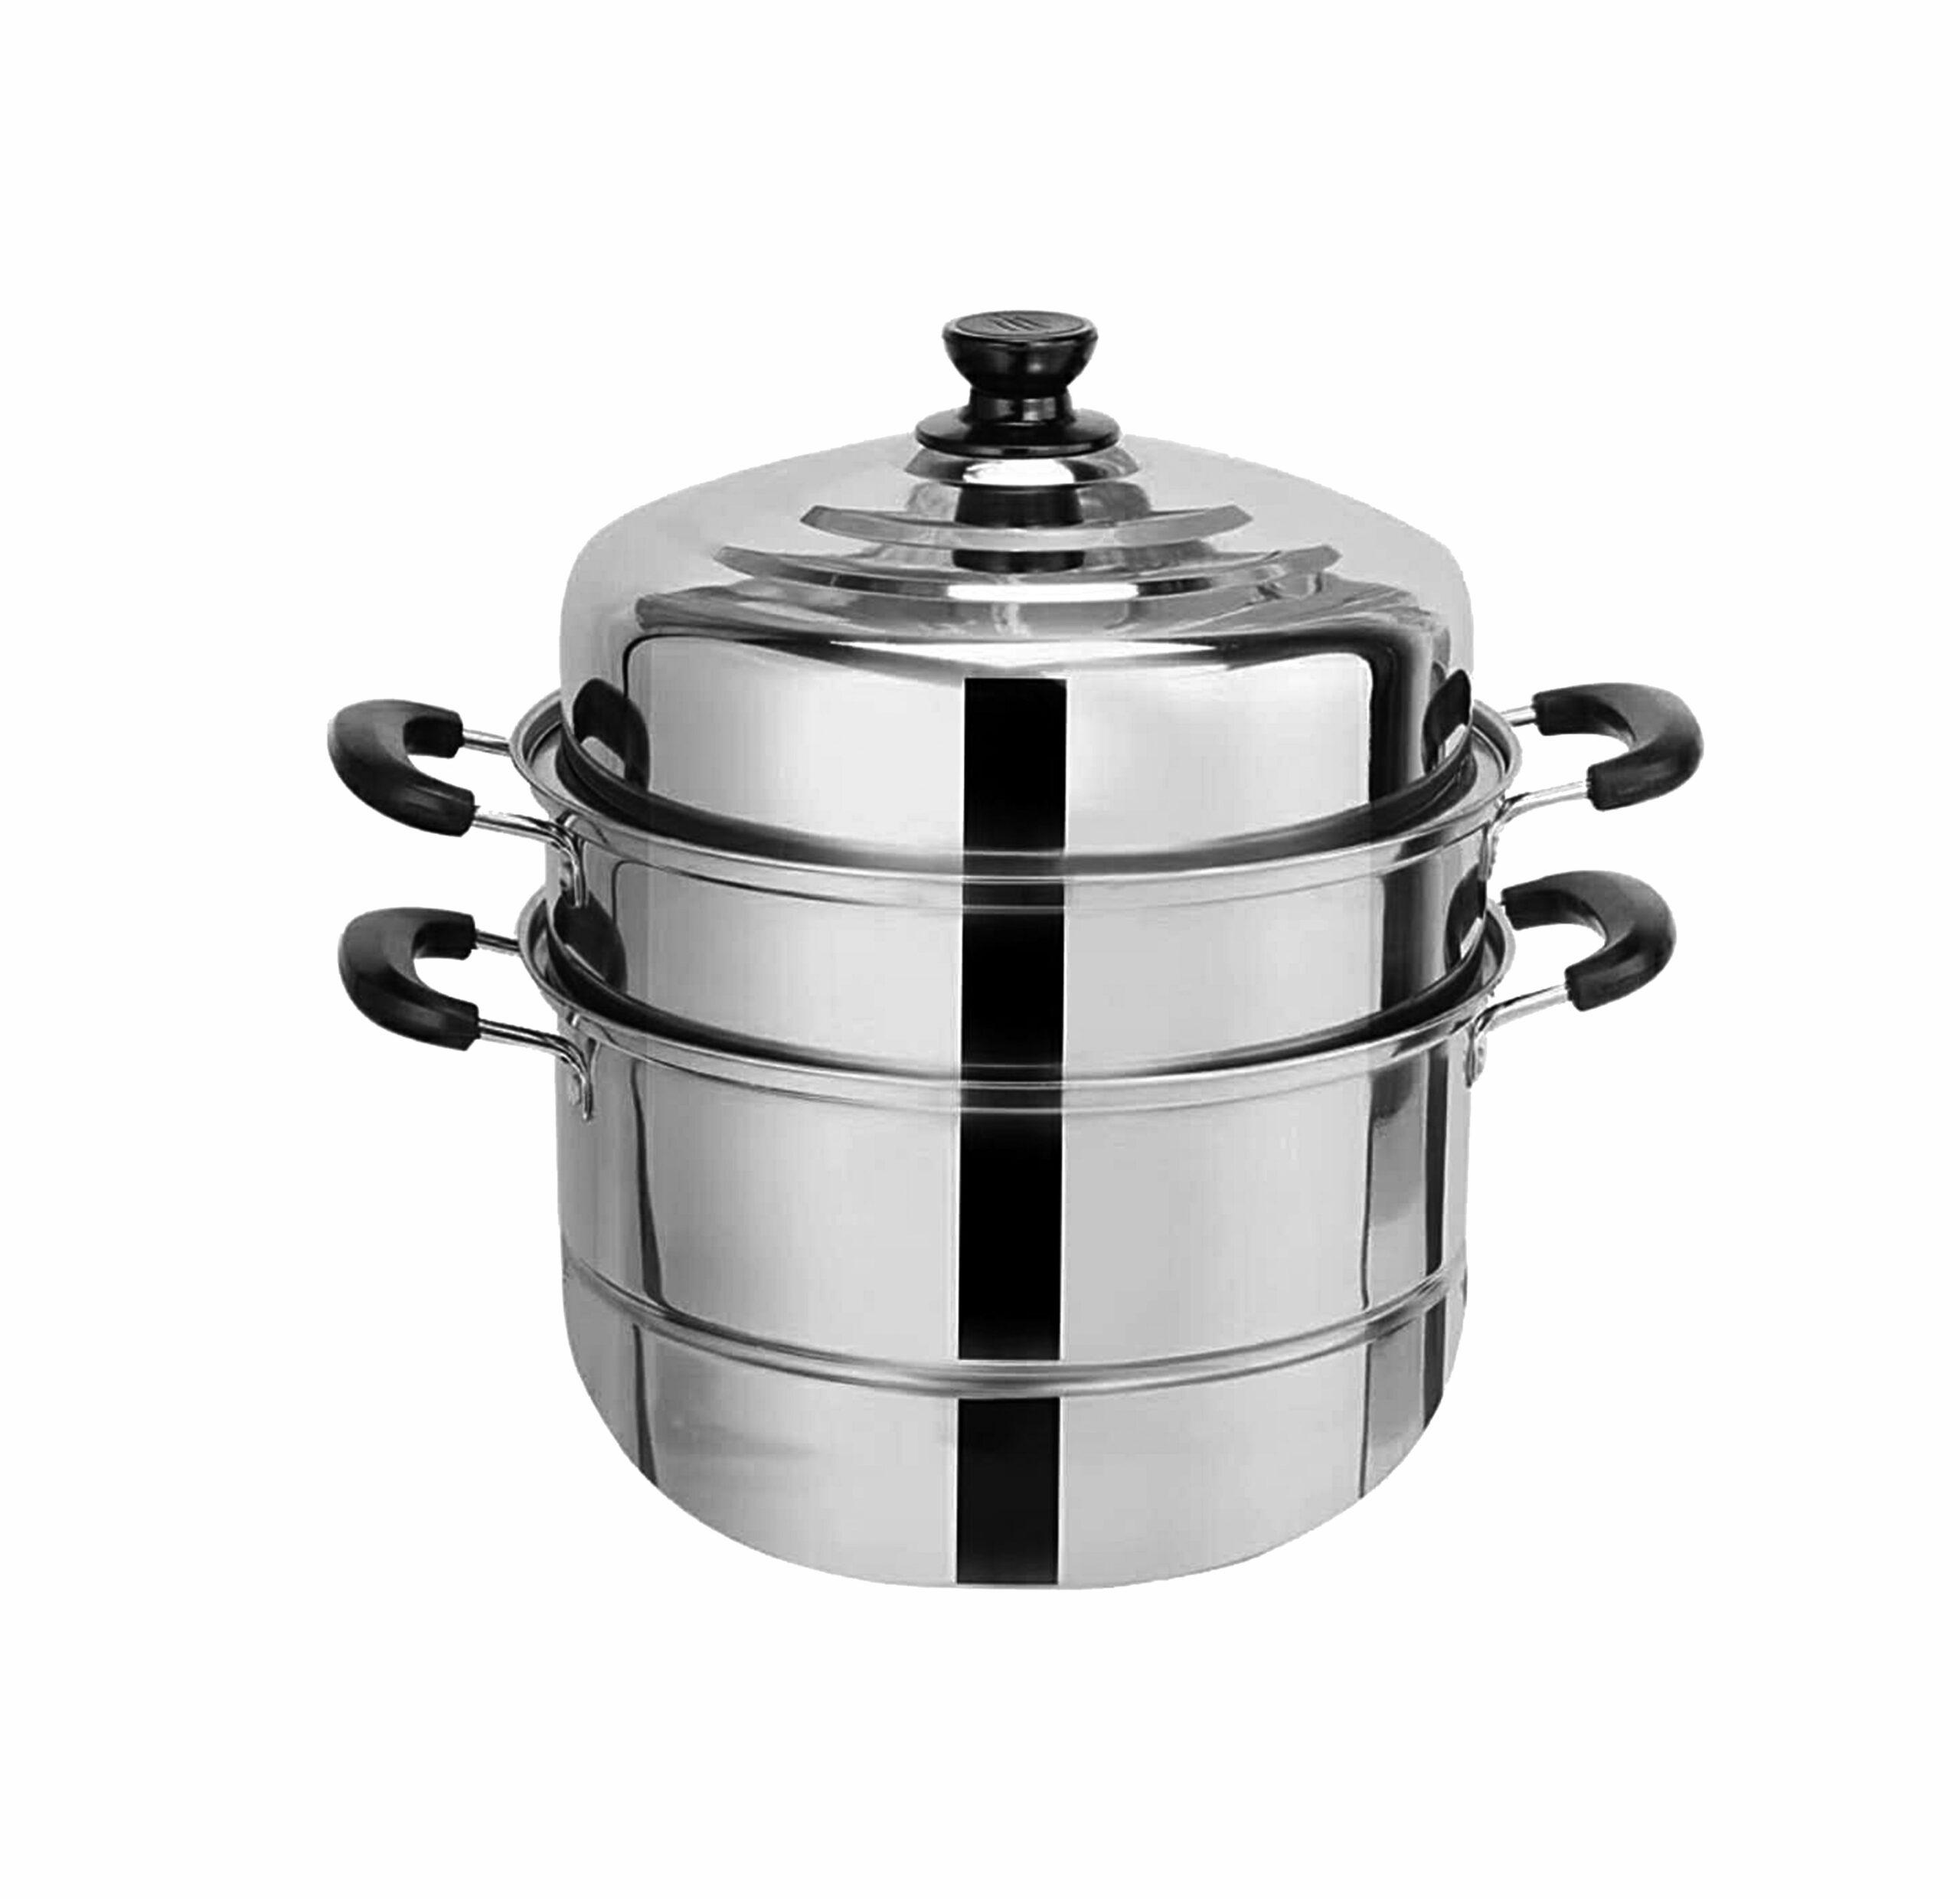 Delcasa Induction-Safe Stainless Steel Large 3-Tier Food Steamer Pot With Lid